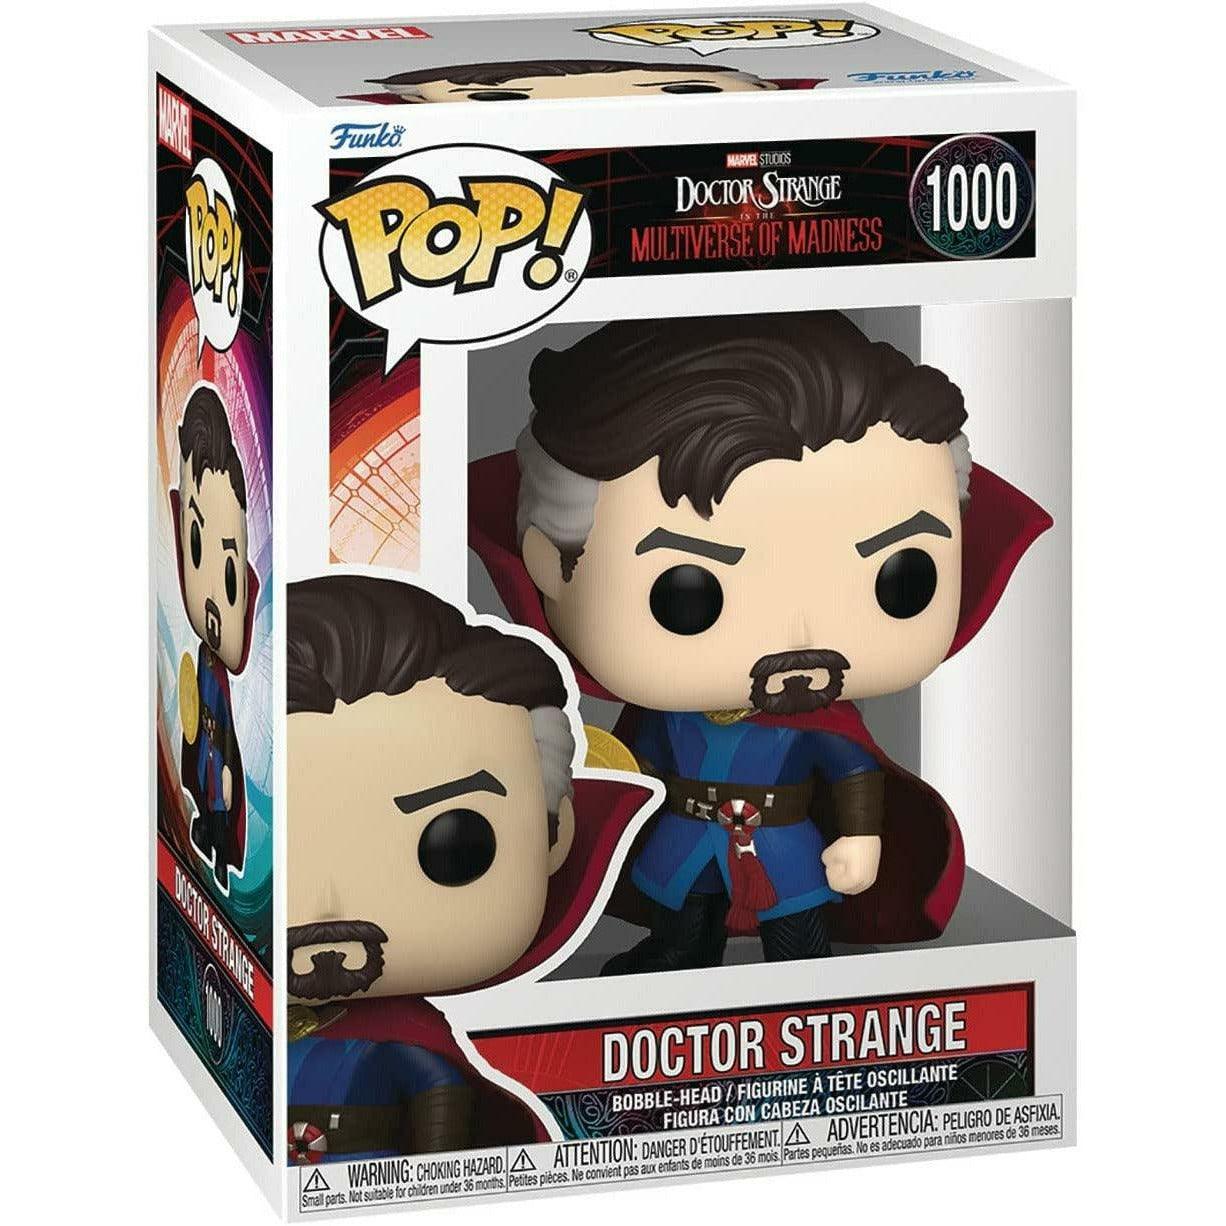 Funko Pop! Marvel Doctor Strange in the Multiverse of Madness - Doctor Strange 1000 - BumbleToys - 18+, 5-7 Years, 6+ Years, Action Figures, Boys, Disney, Funko, Marvel, OXE, Pre-Order